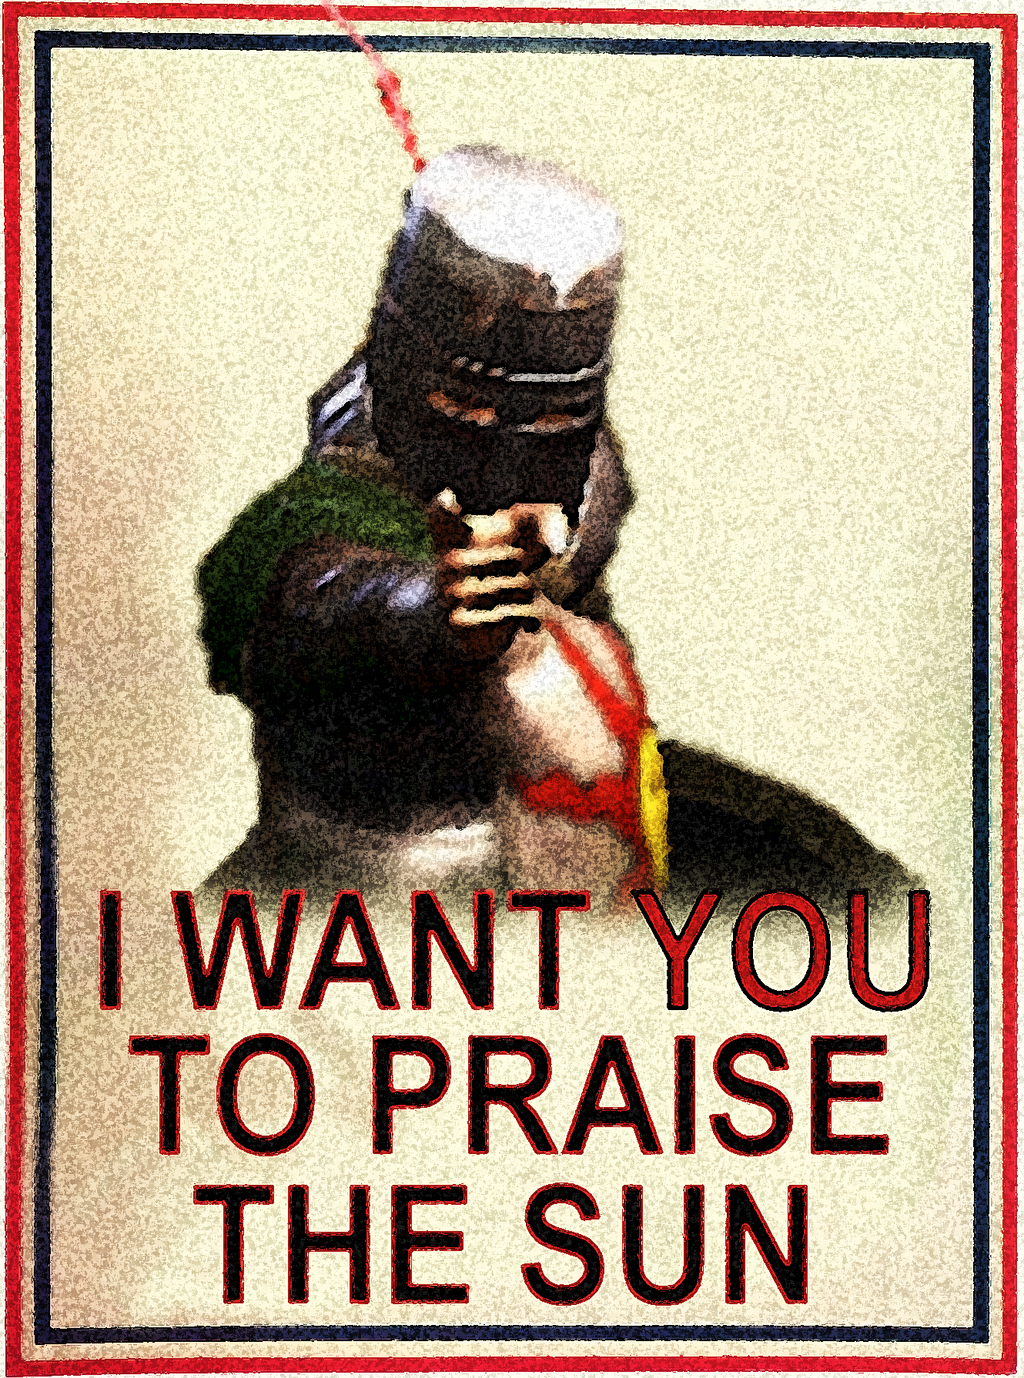 i_want_you_to_praise_the_sun_by_thornblackstar-d7bxz99.png